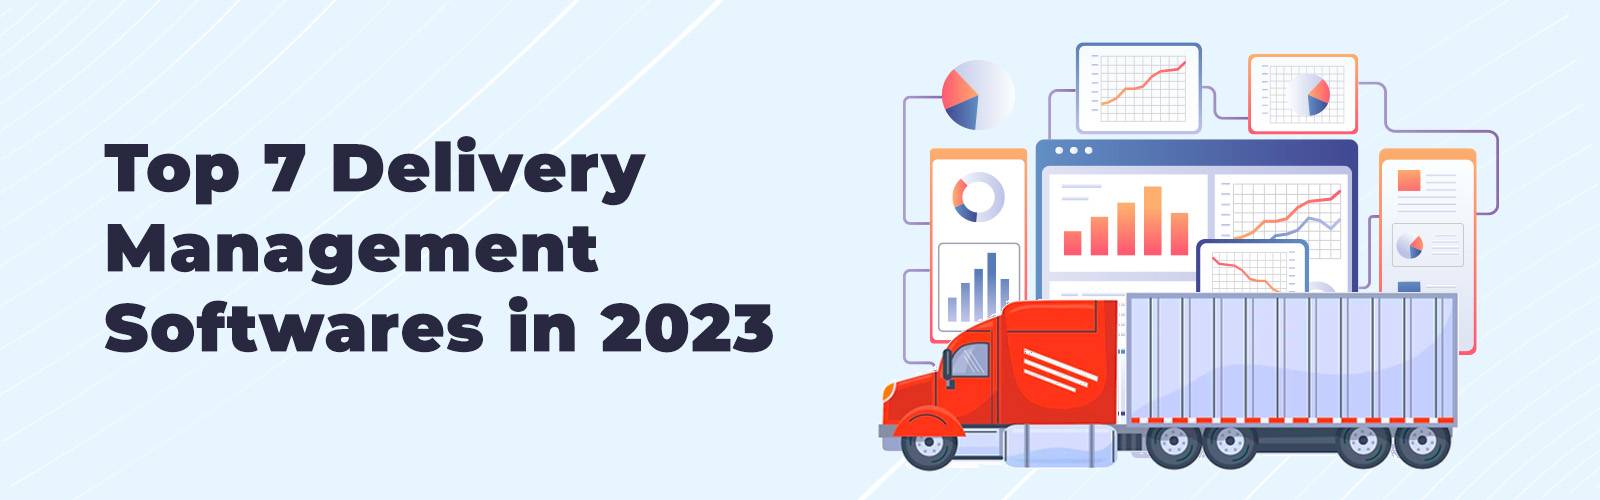 Top 7 delivery management software in 2023